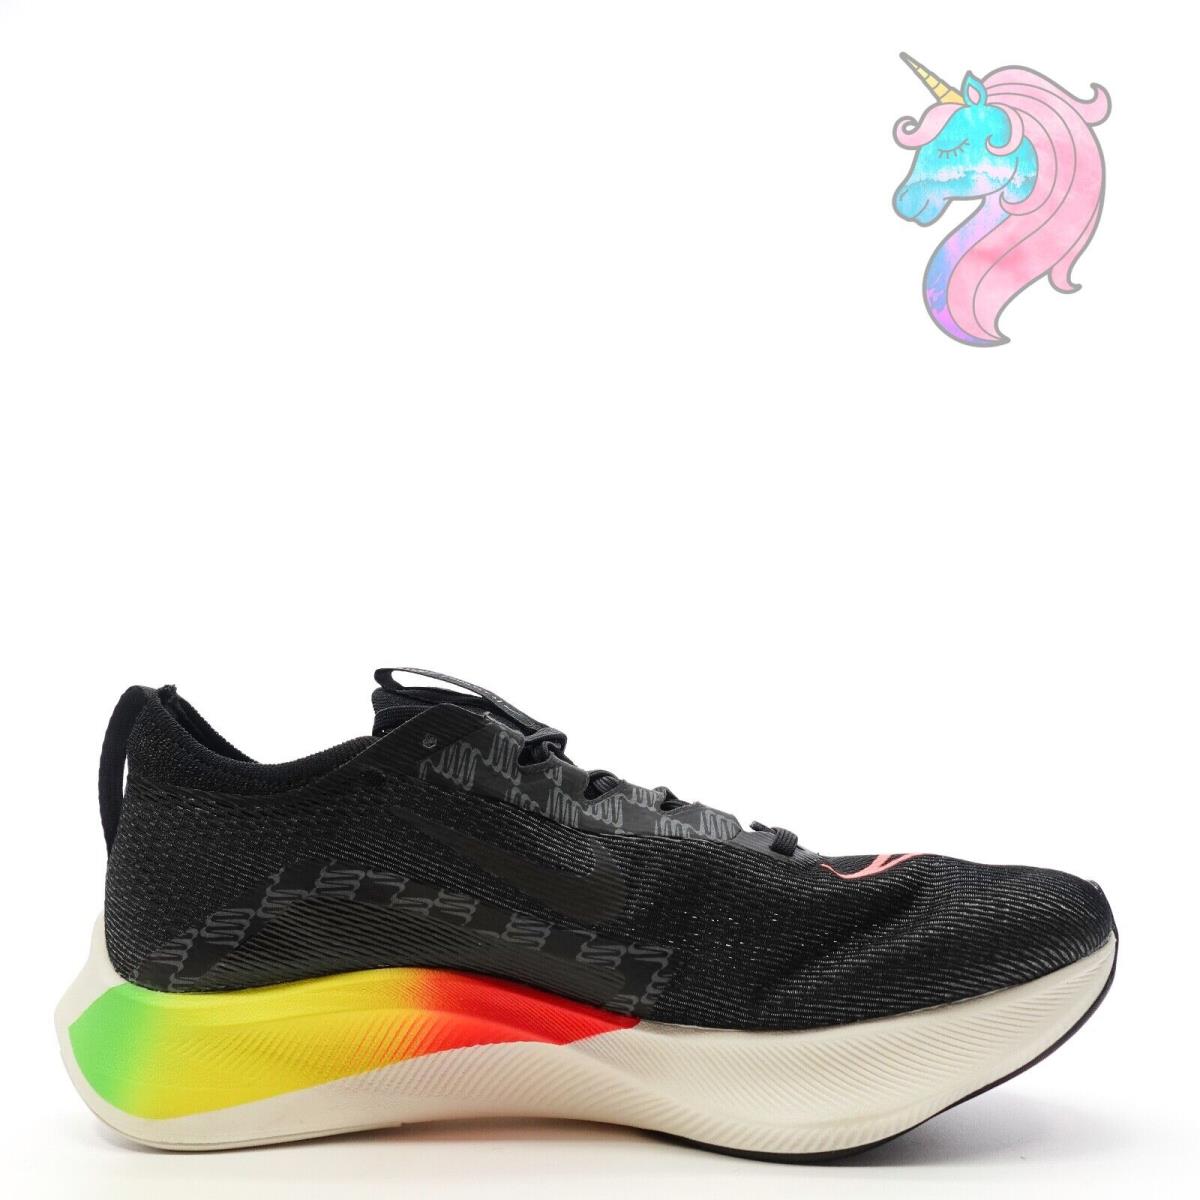 Nike shoes Zoom Fly - Black, Red, Yellow, Green 1